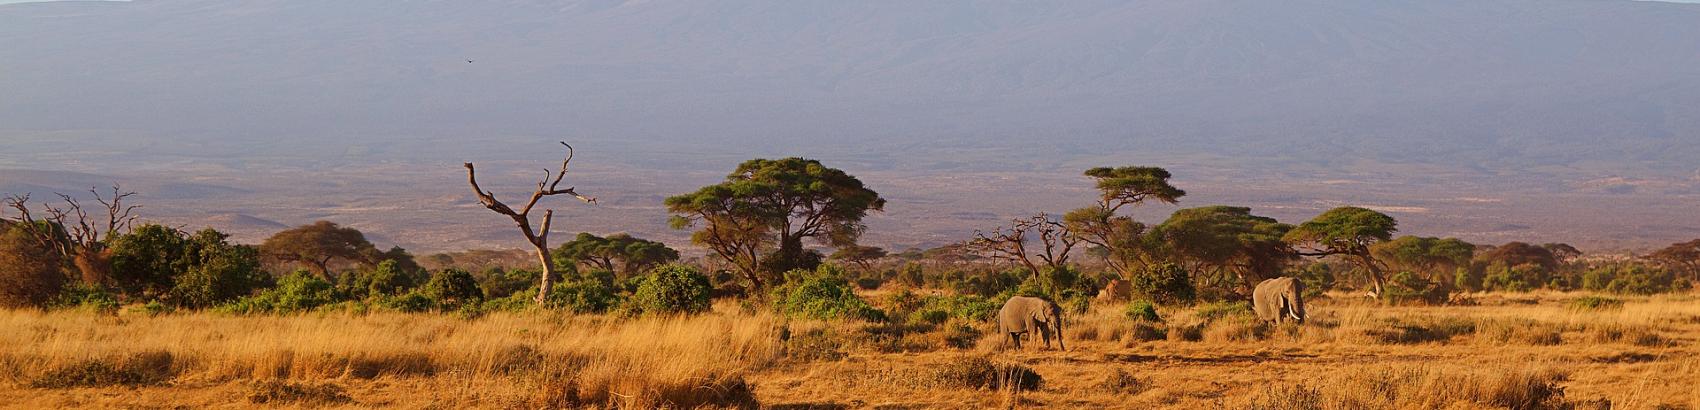 SCI Helvetia Chapter - How Kenya 'plotted' own wildlife loss